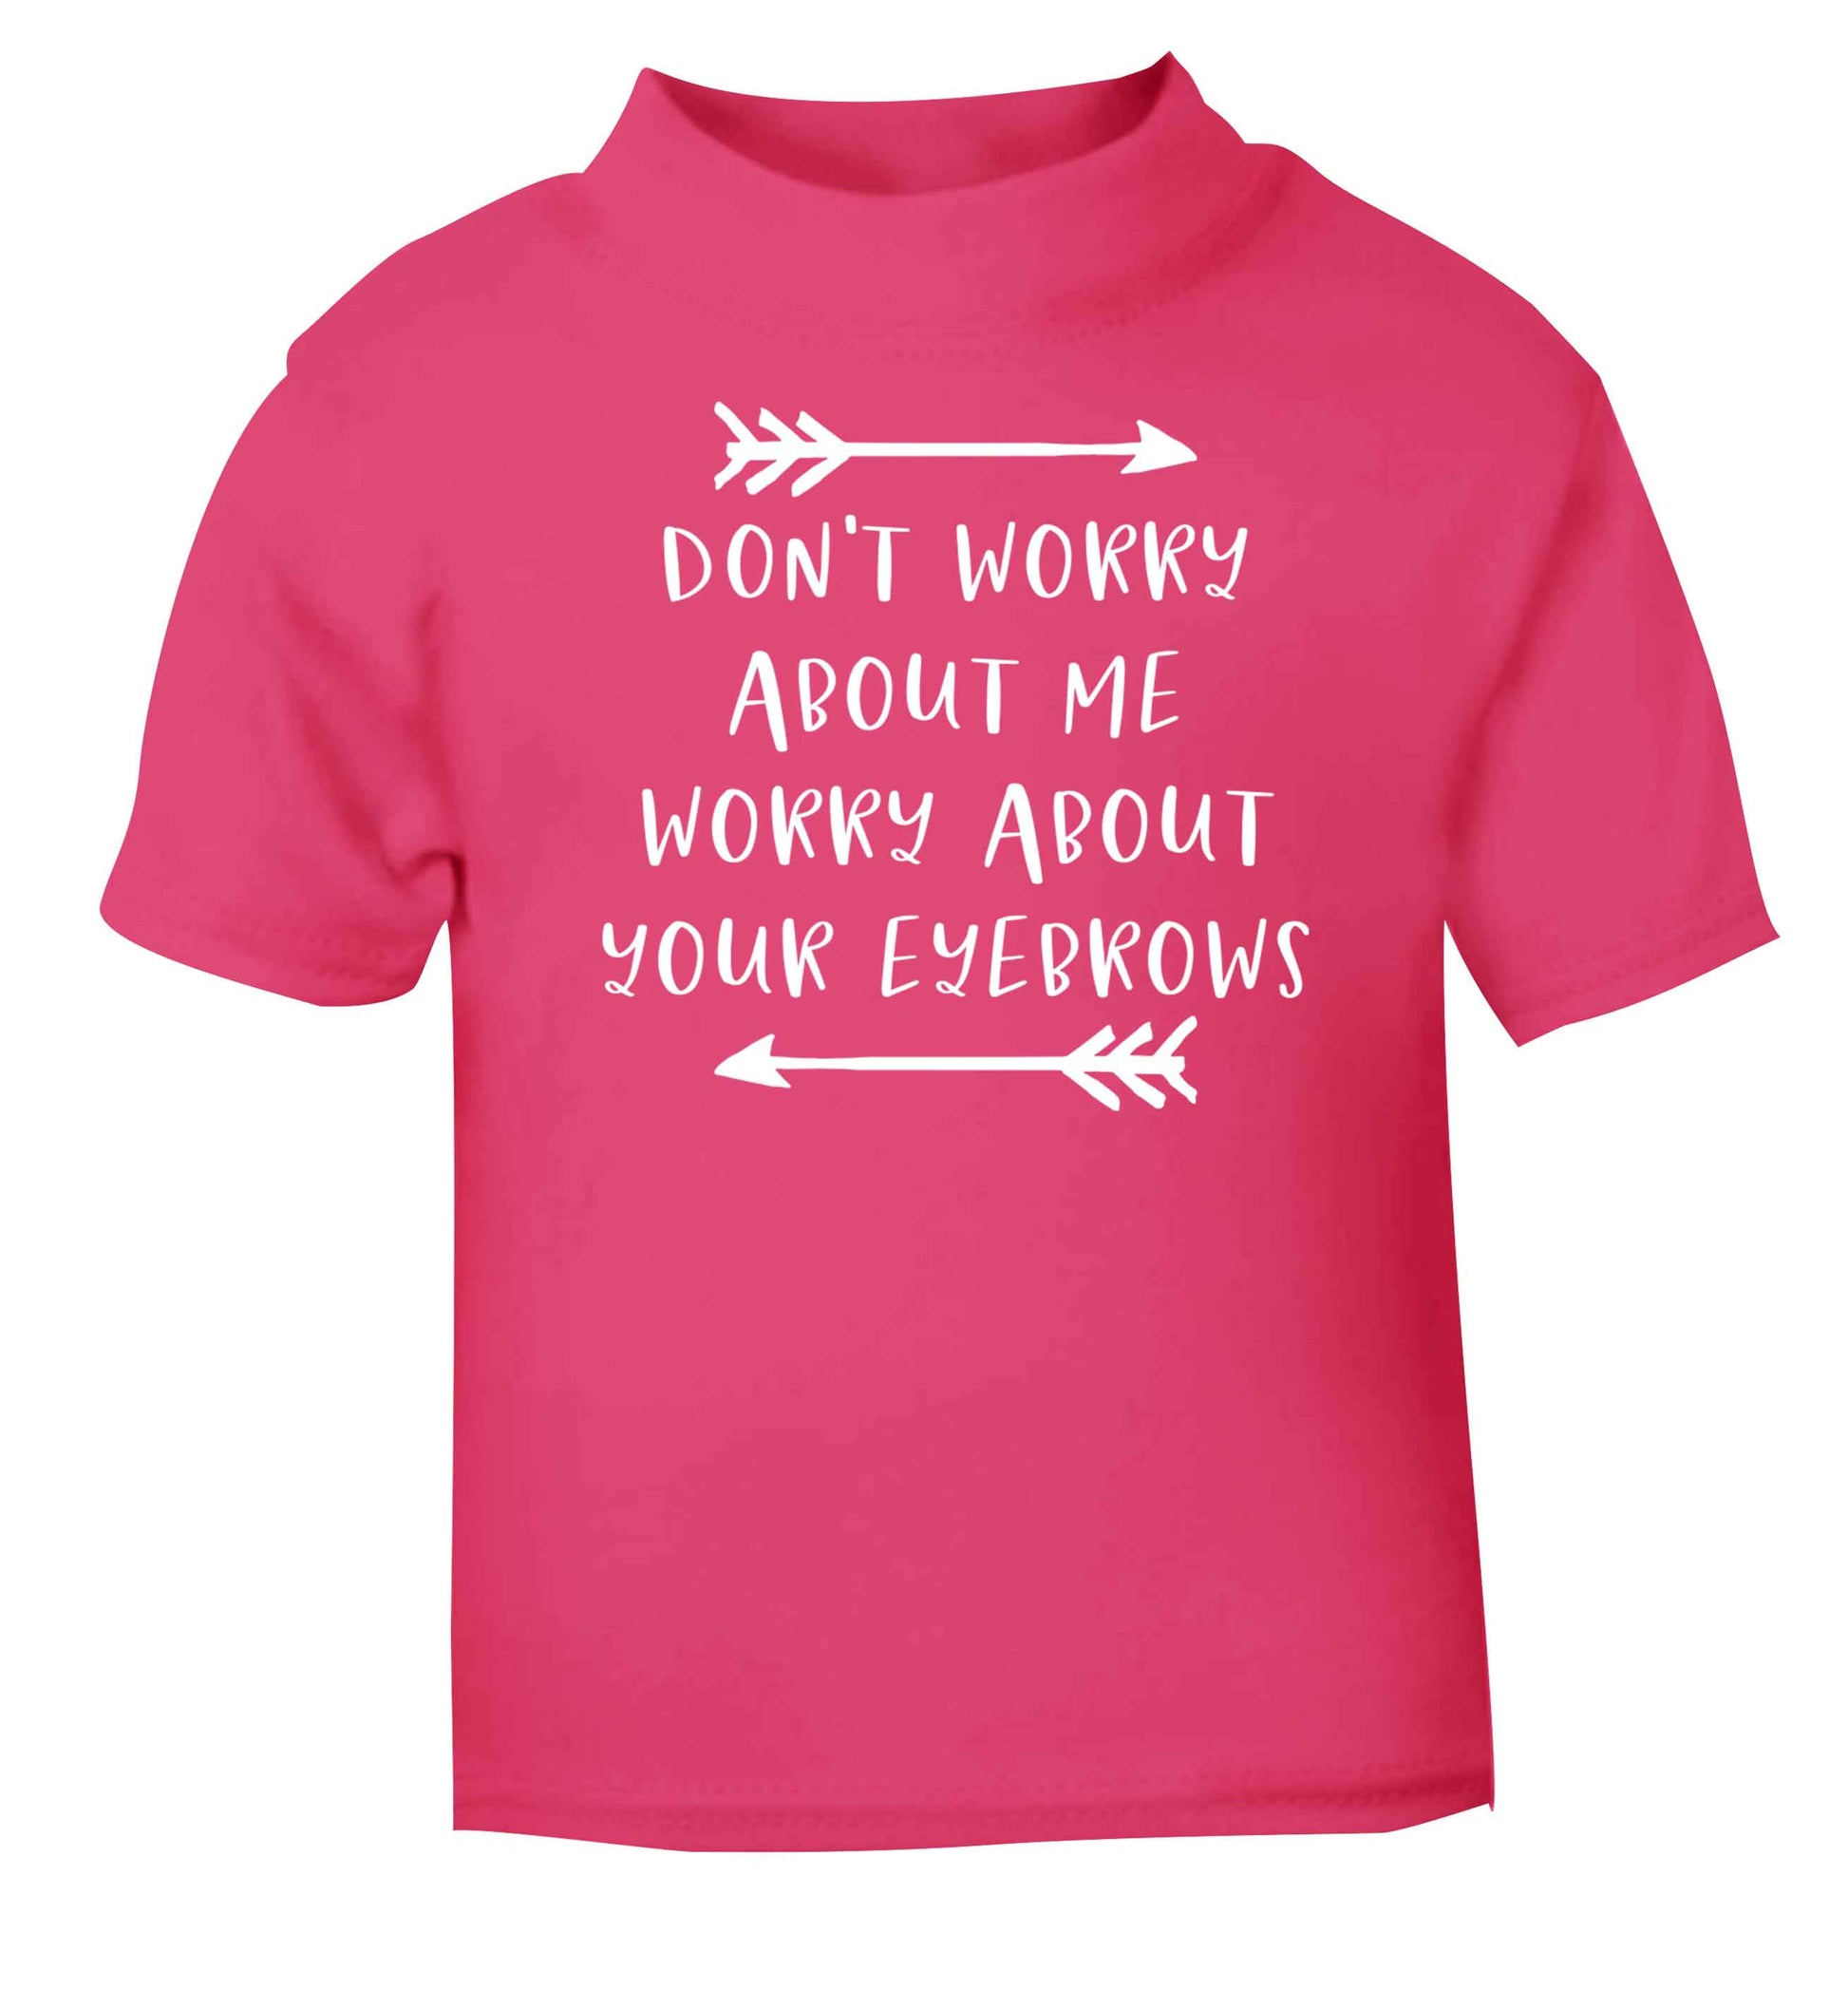 Don't worry about me worry about your eyebrows pink baby toddler Tshirt 2 Years